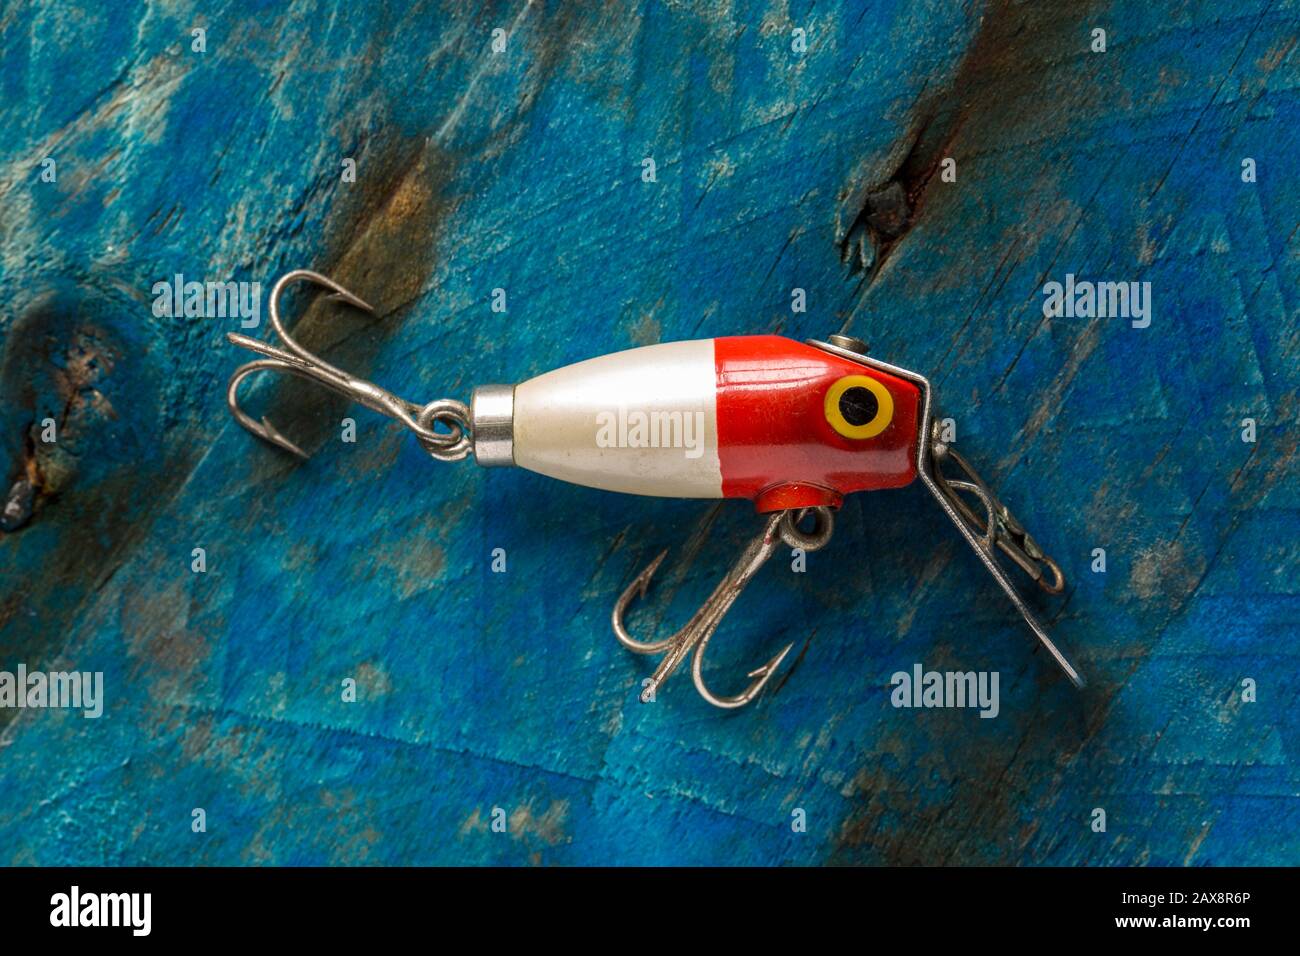 An old fishing lure, or plug, equipped with treble hooks designed to catch predatory fish. The lure has possibly been made by Woods Mfg, but this cann Stock Photo